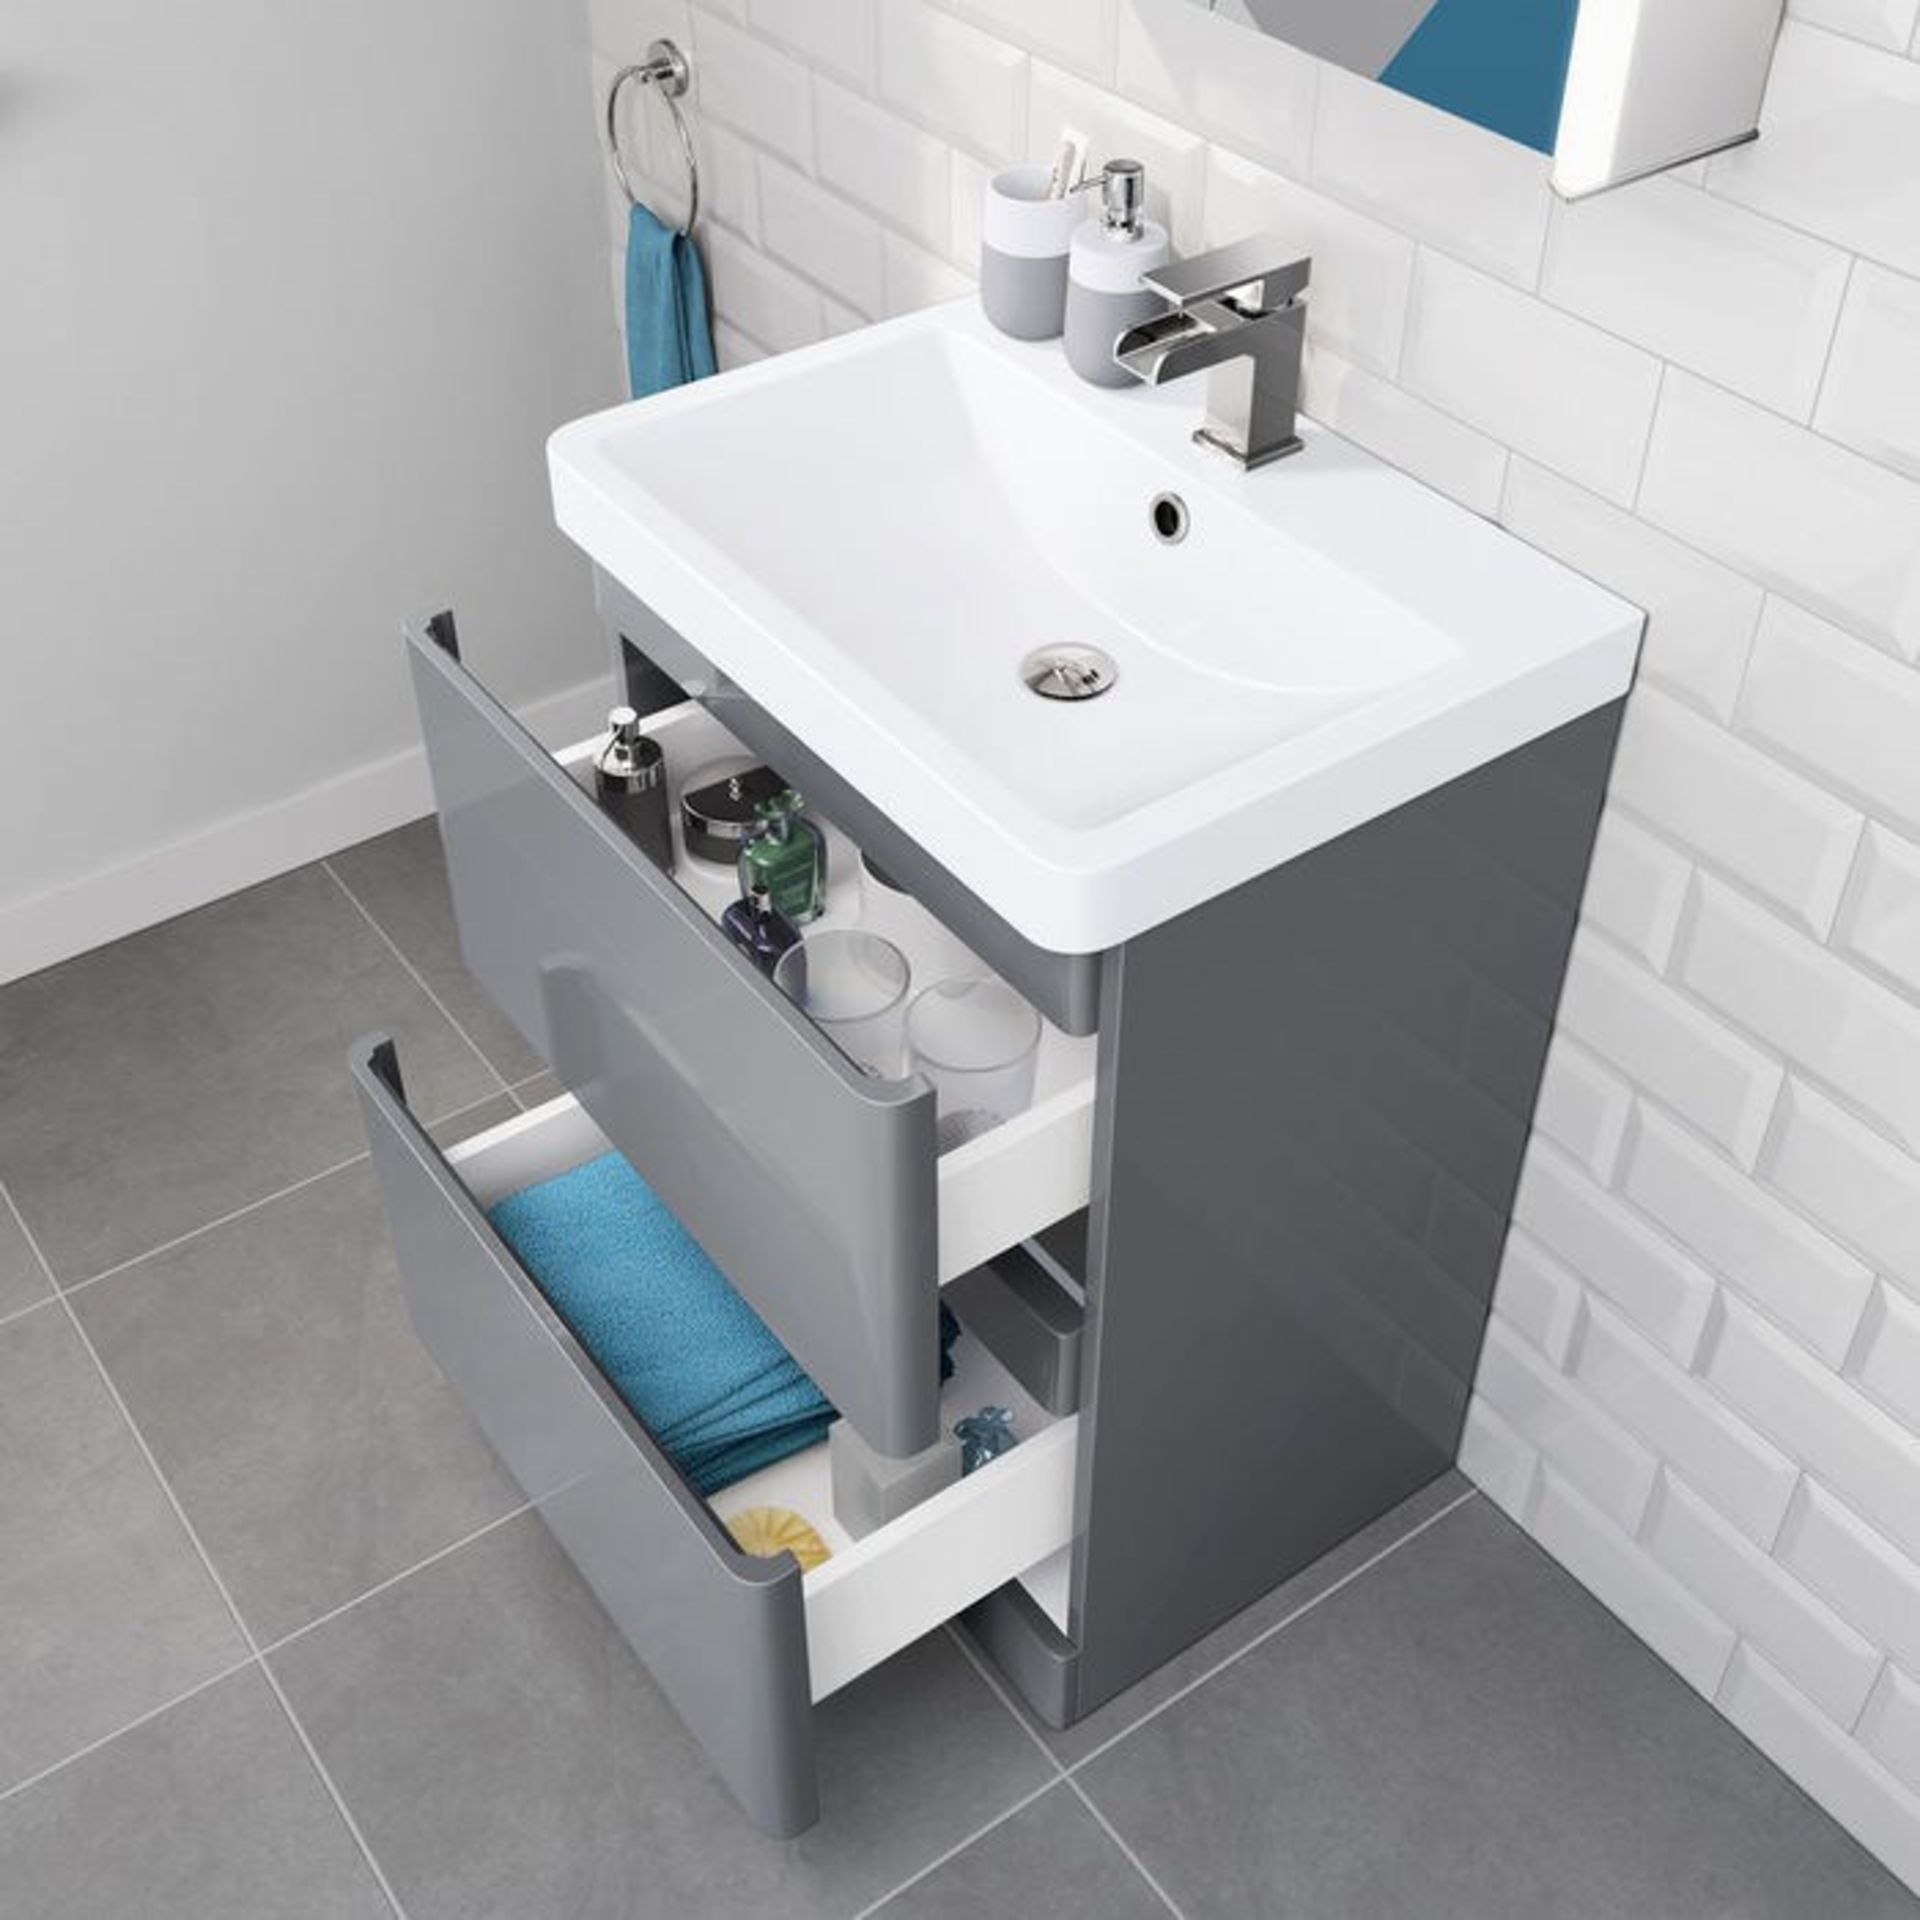 (QQ26) 600mm Denver Gloss Grey Built In Basin Drawer Unit - Floor Standing. RRP £499.99. Come... - Image 2 of 4